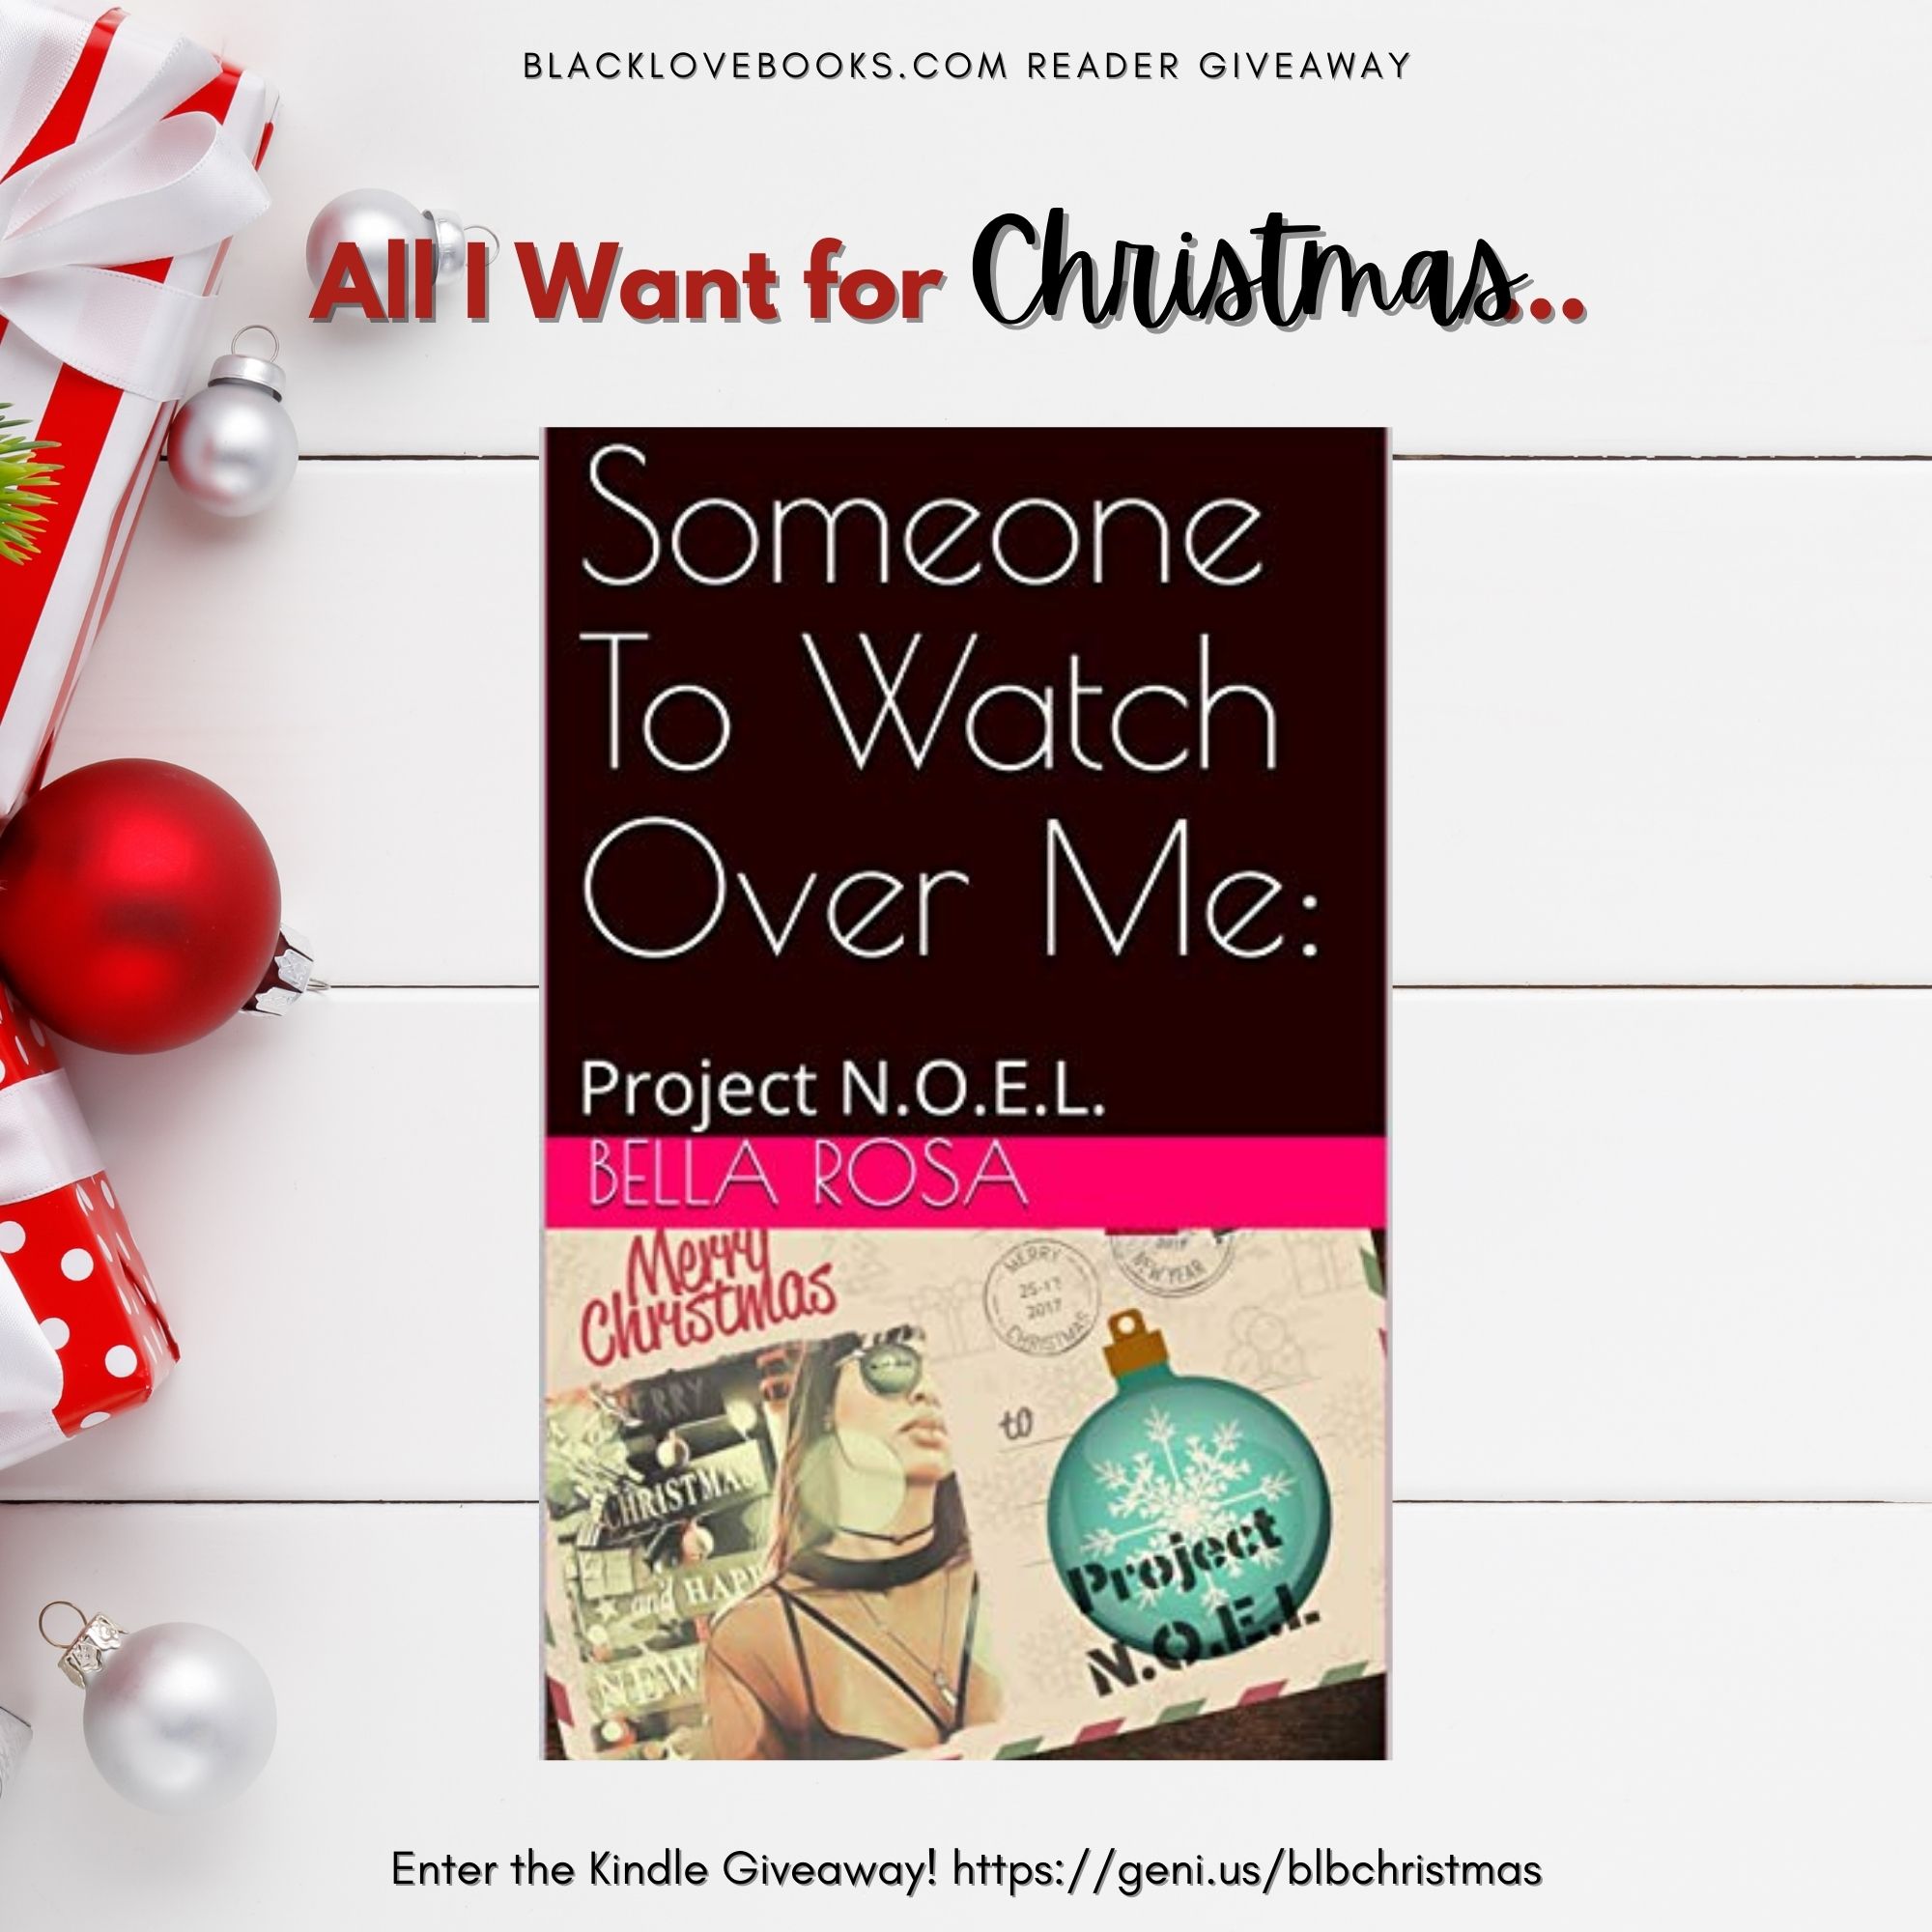 All I Want for Christmas is… Project NOEL by BellaRosa